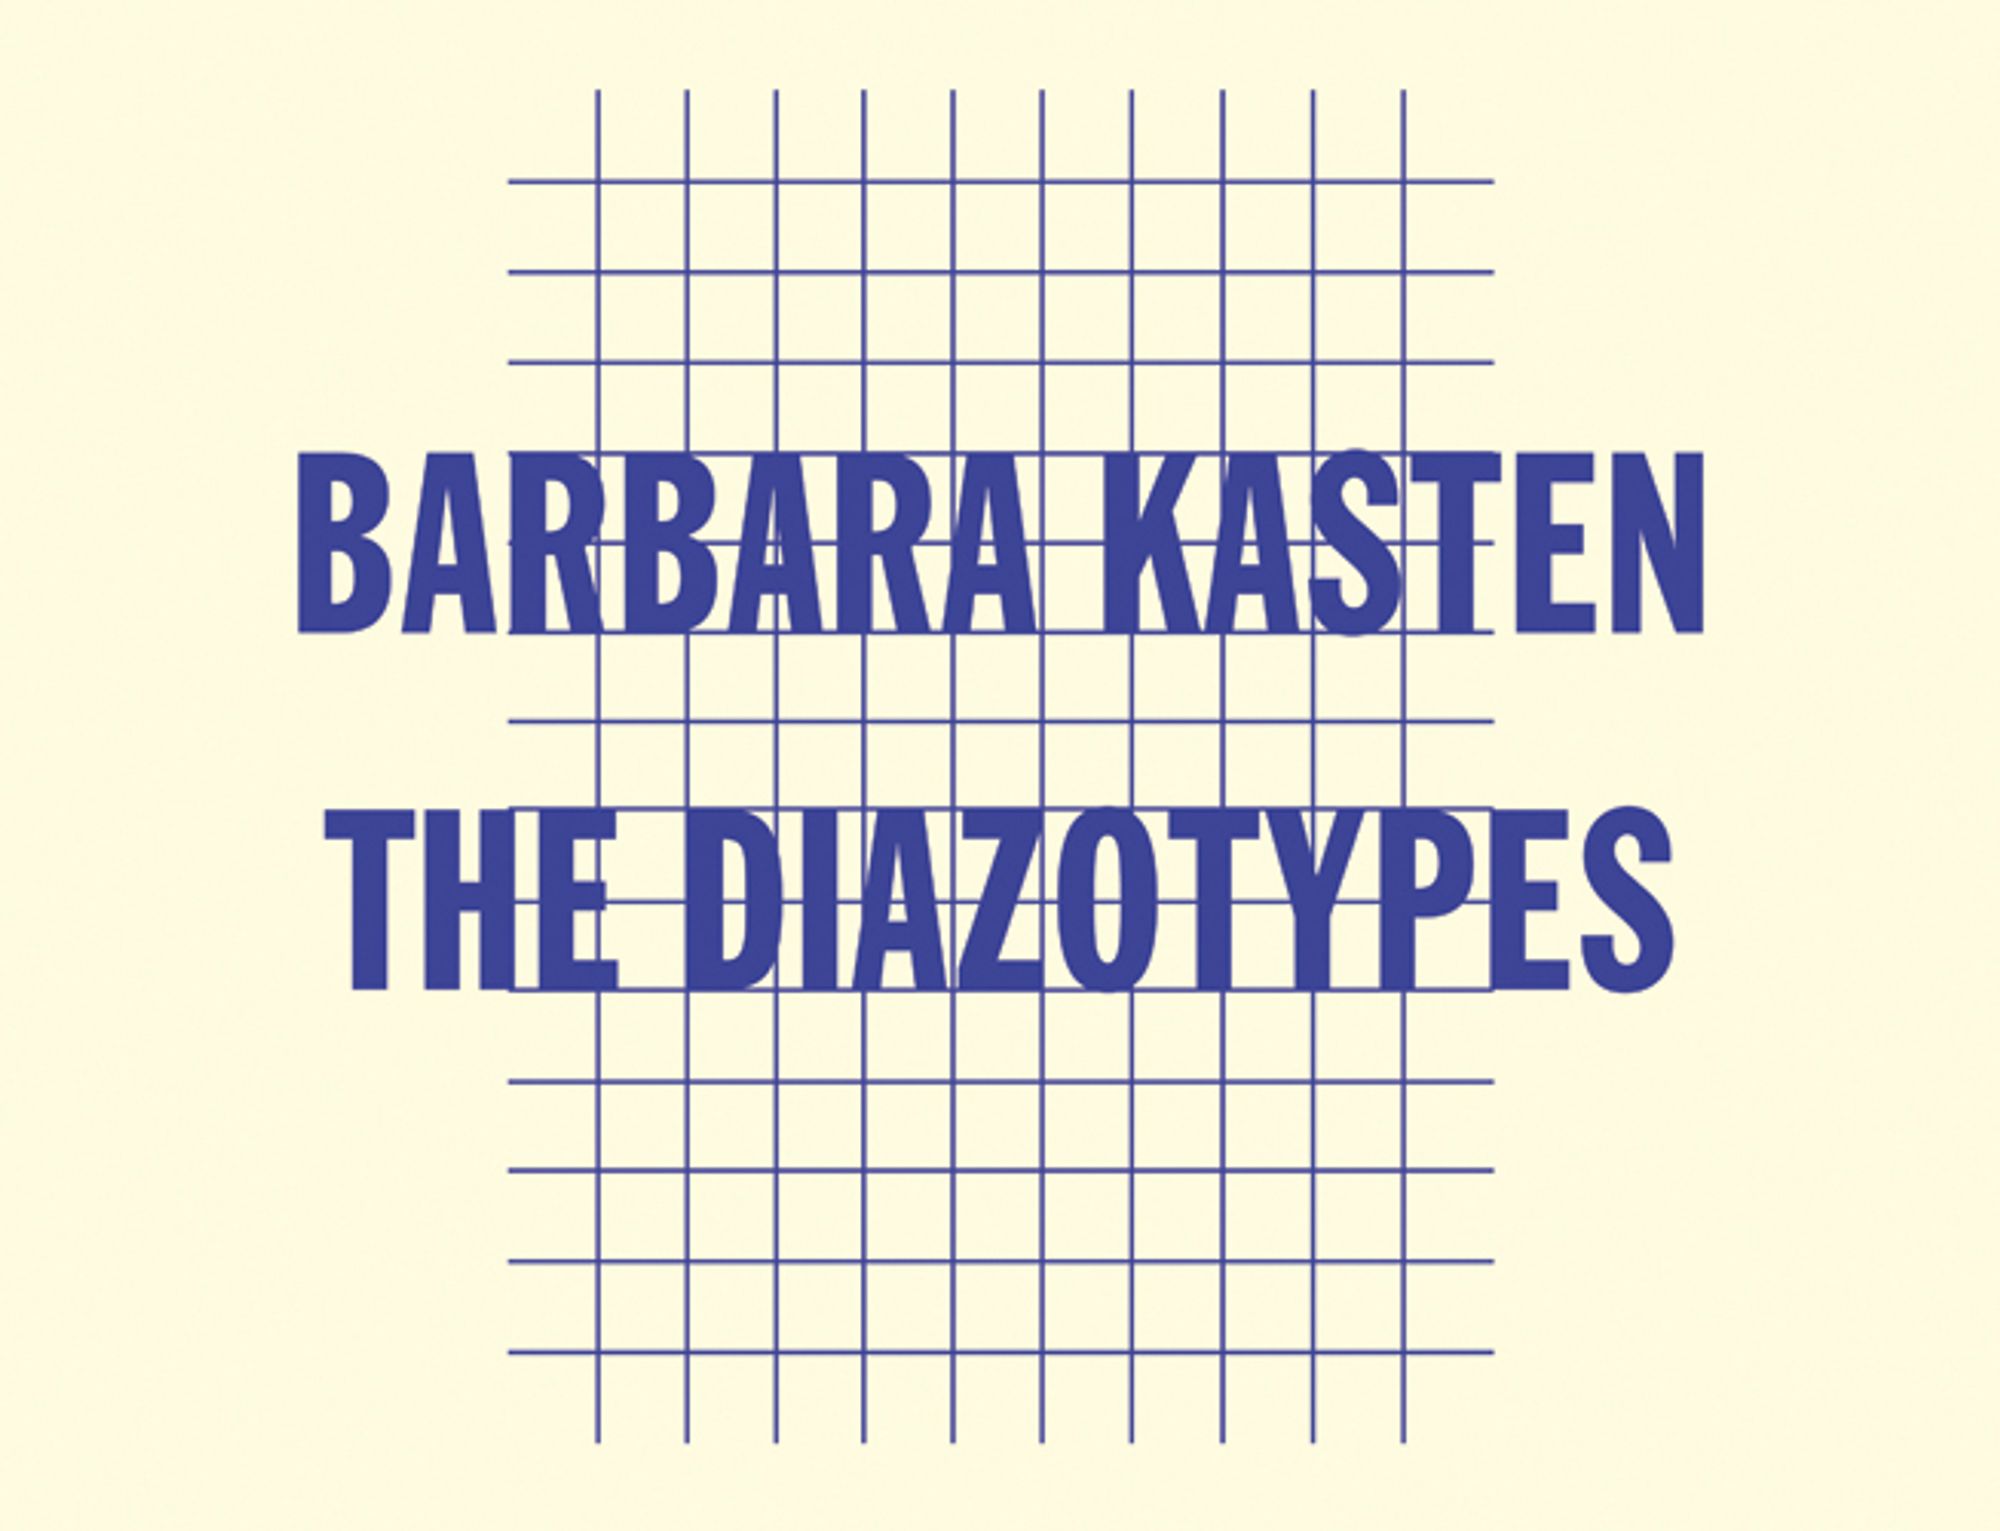 Detail view of Barbara Kasten: The Diazotypes against a plain gray background